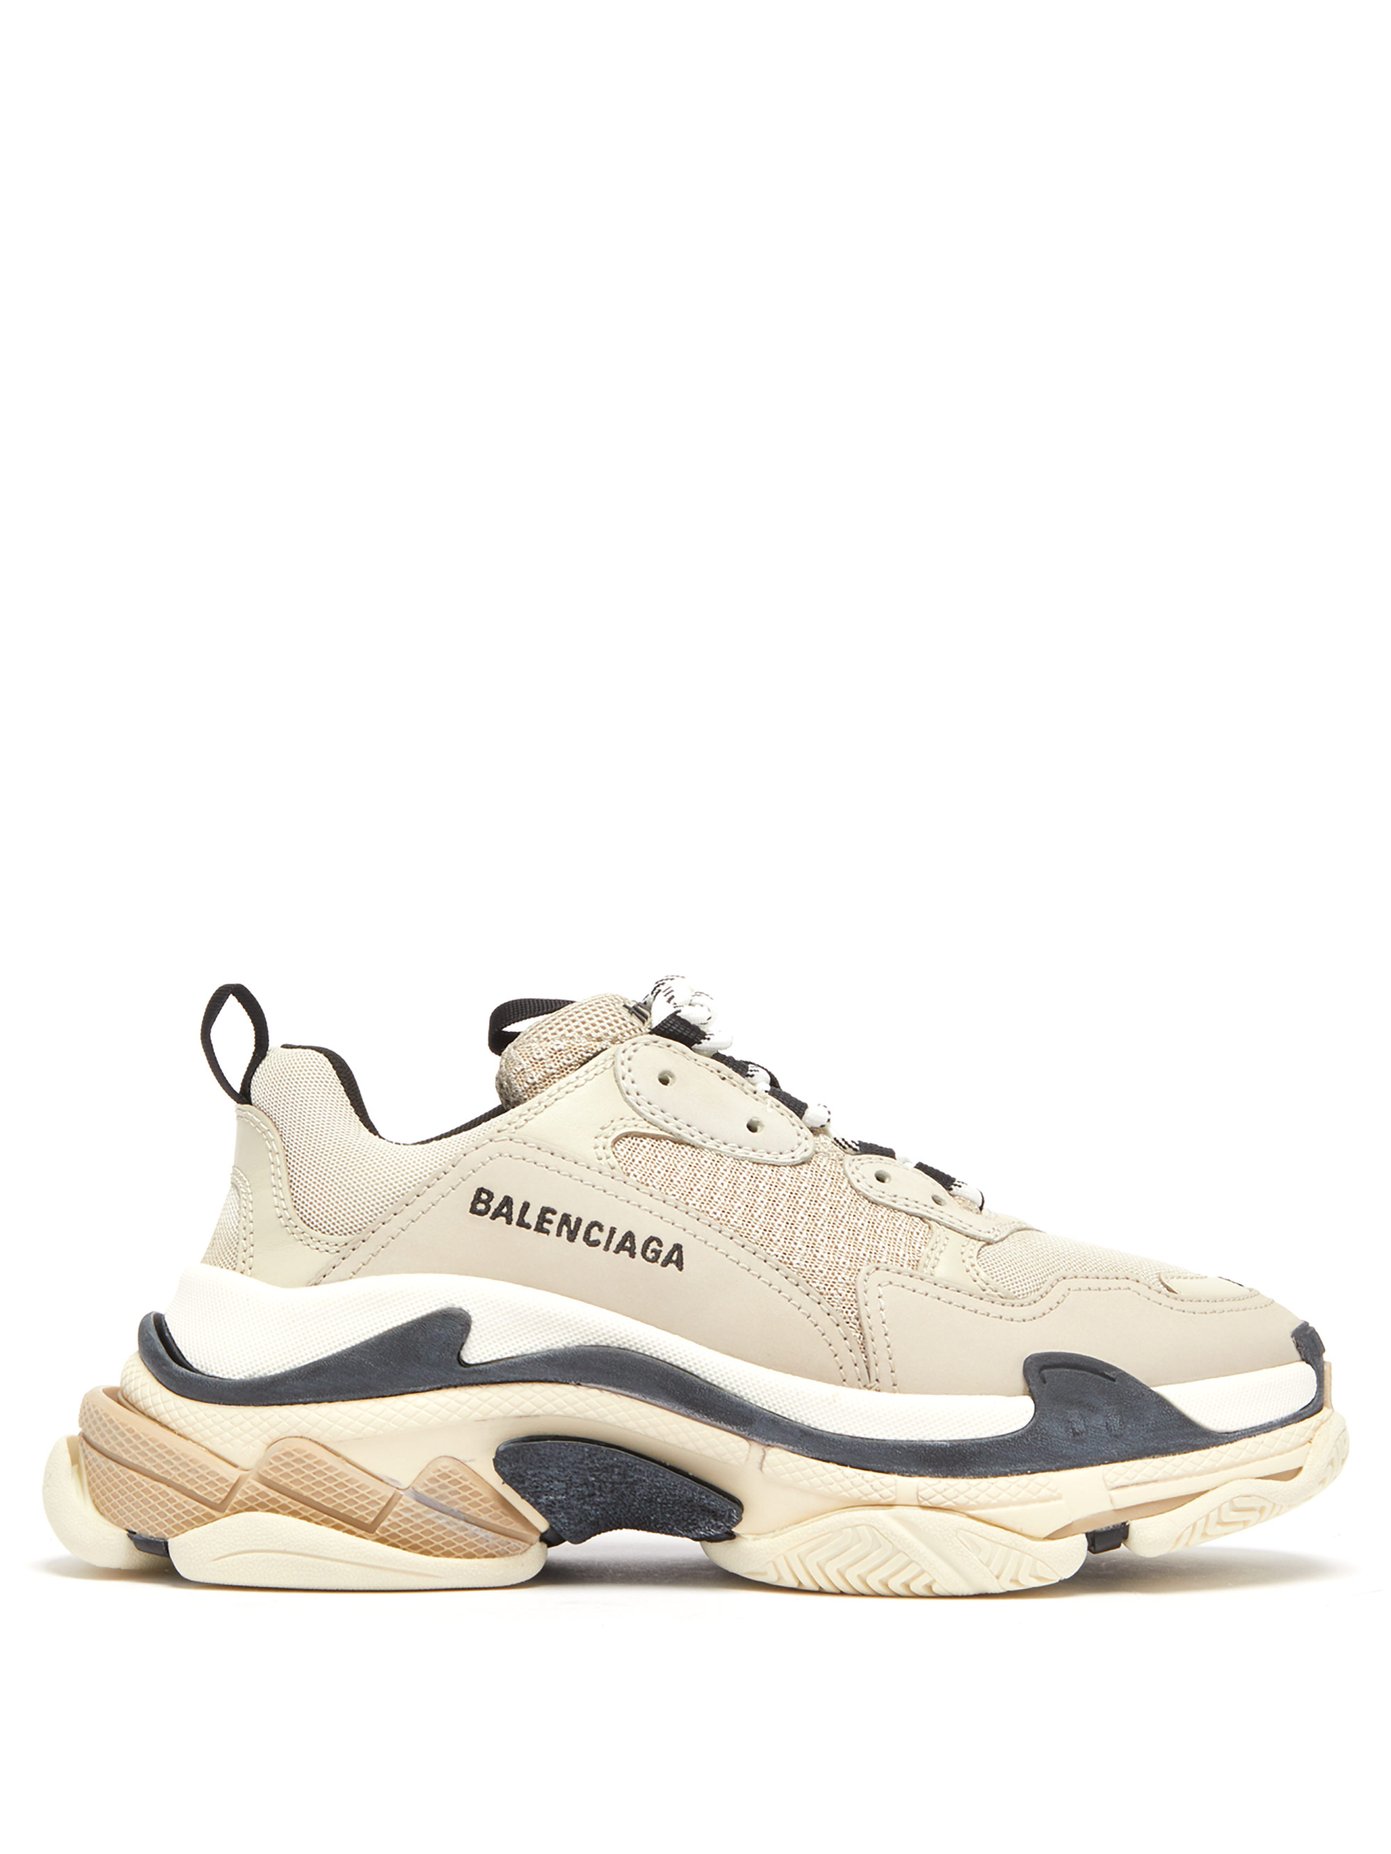 ﻿My review of Balenciaga speed trainers and Triple s by seller zax